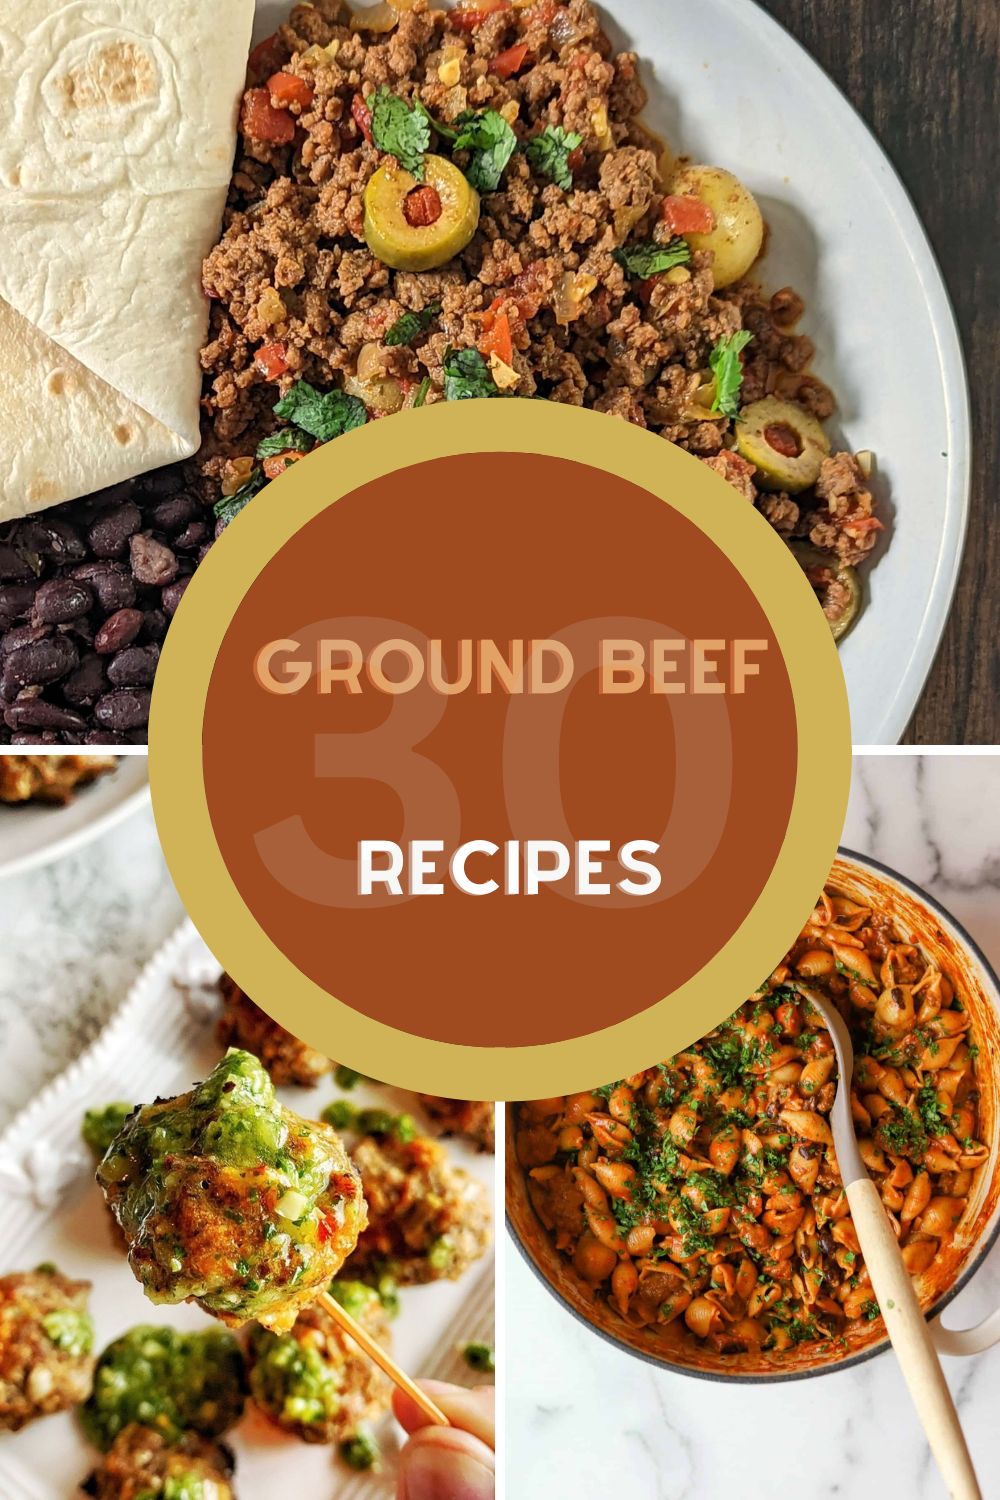 A Pinterest pin for ground beef recipes.